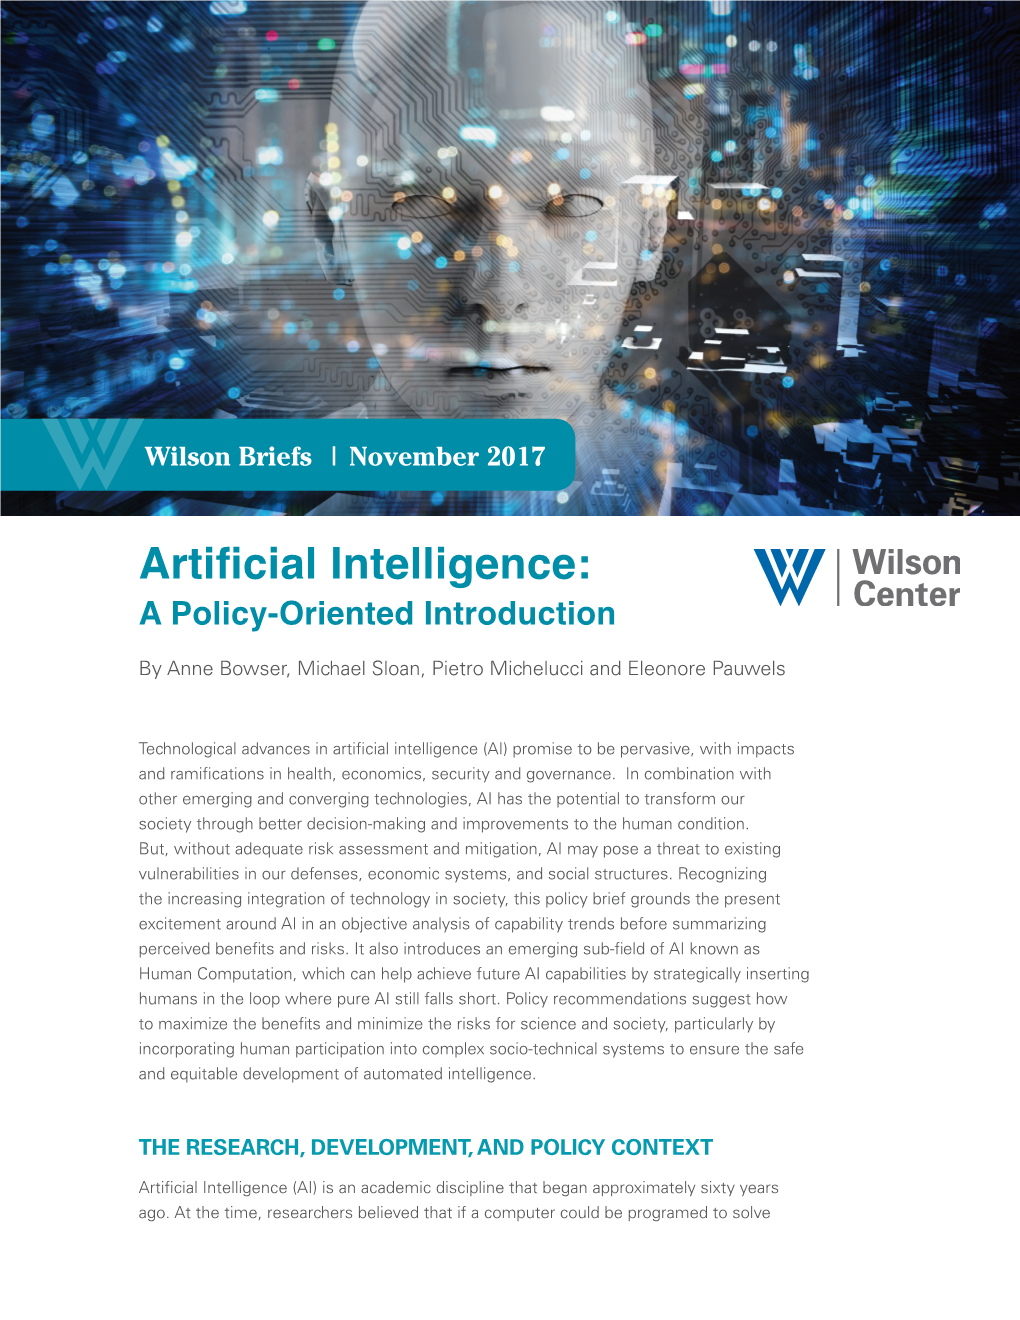 Artificial Intelligence: a Policy-Oriented Introduction